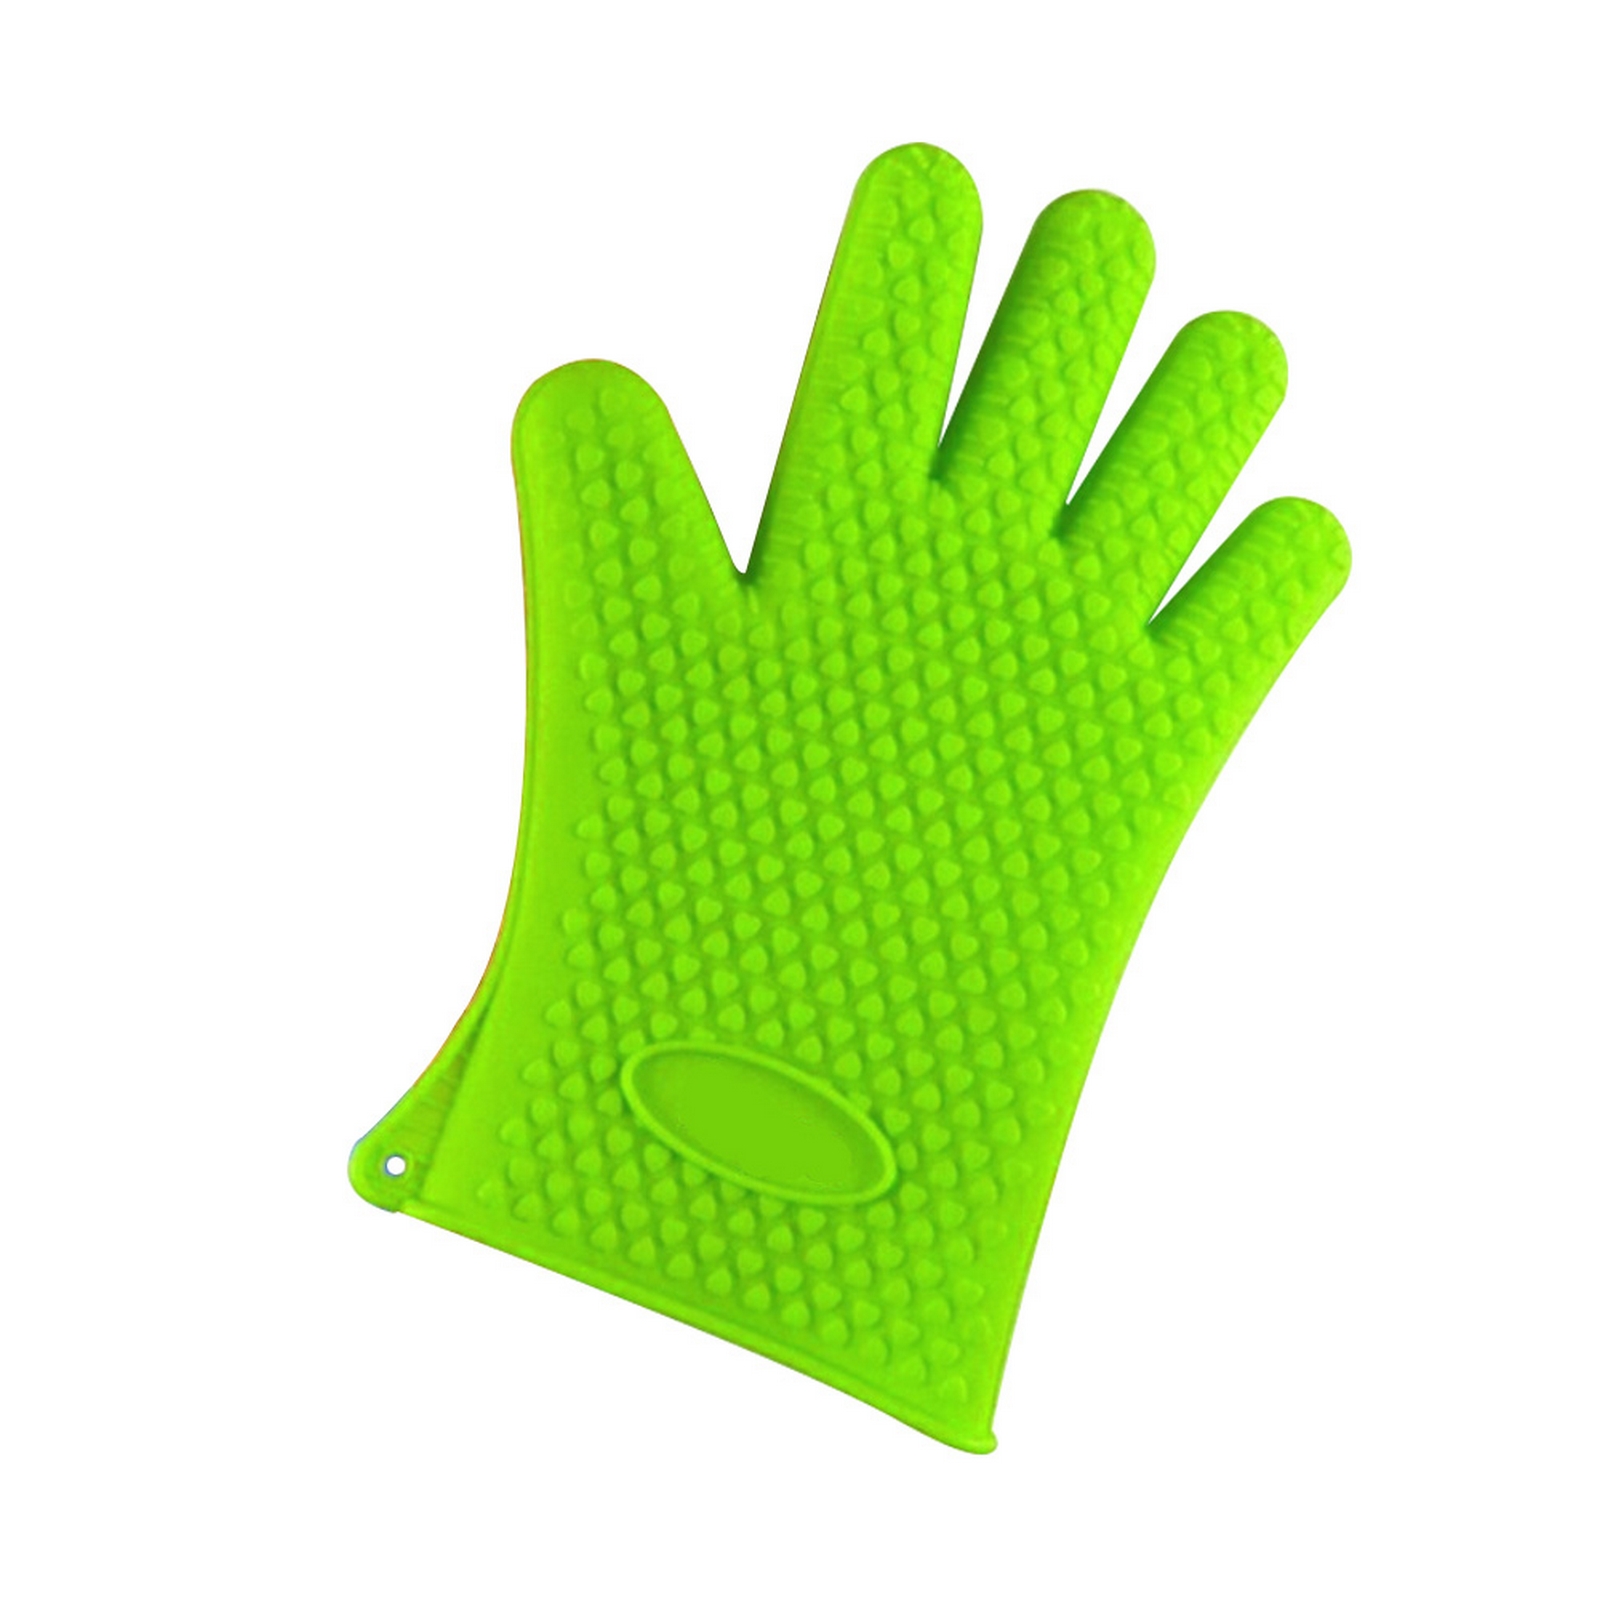 Heat Resistant BBQ Cooking Silicone Oven Glove Mitt